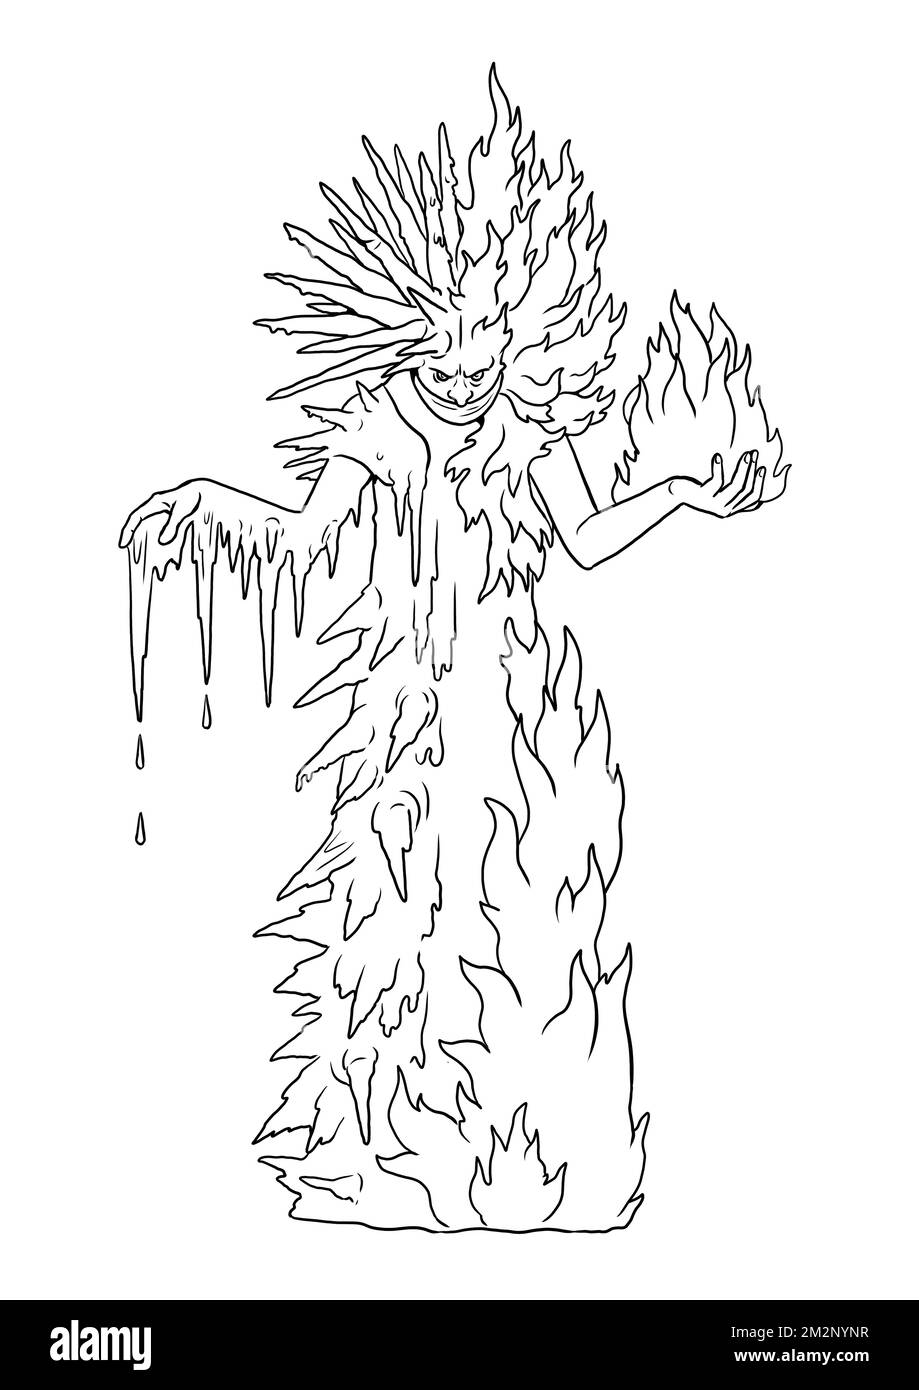 Wizard of Fire and Ice. Coloring page for wizard lover. Stock Photo